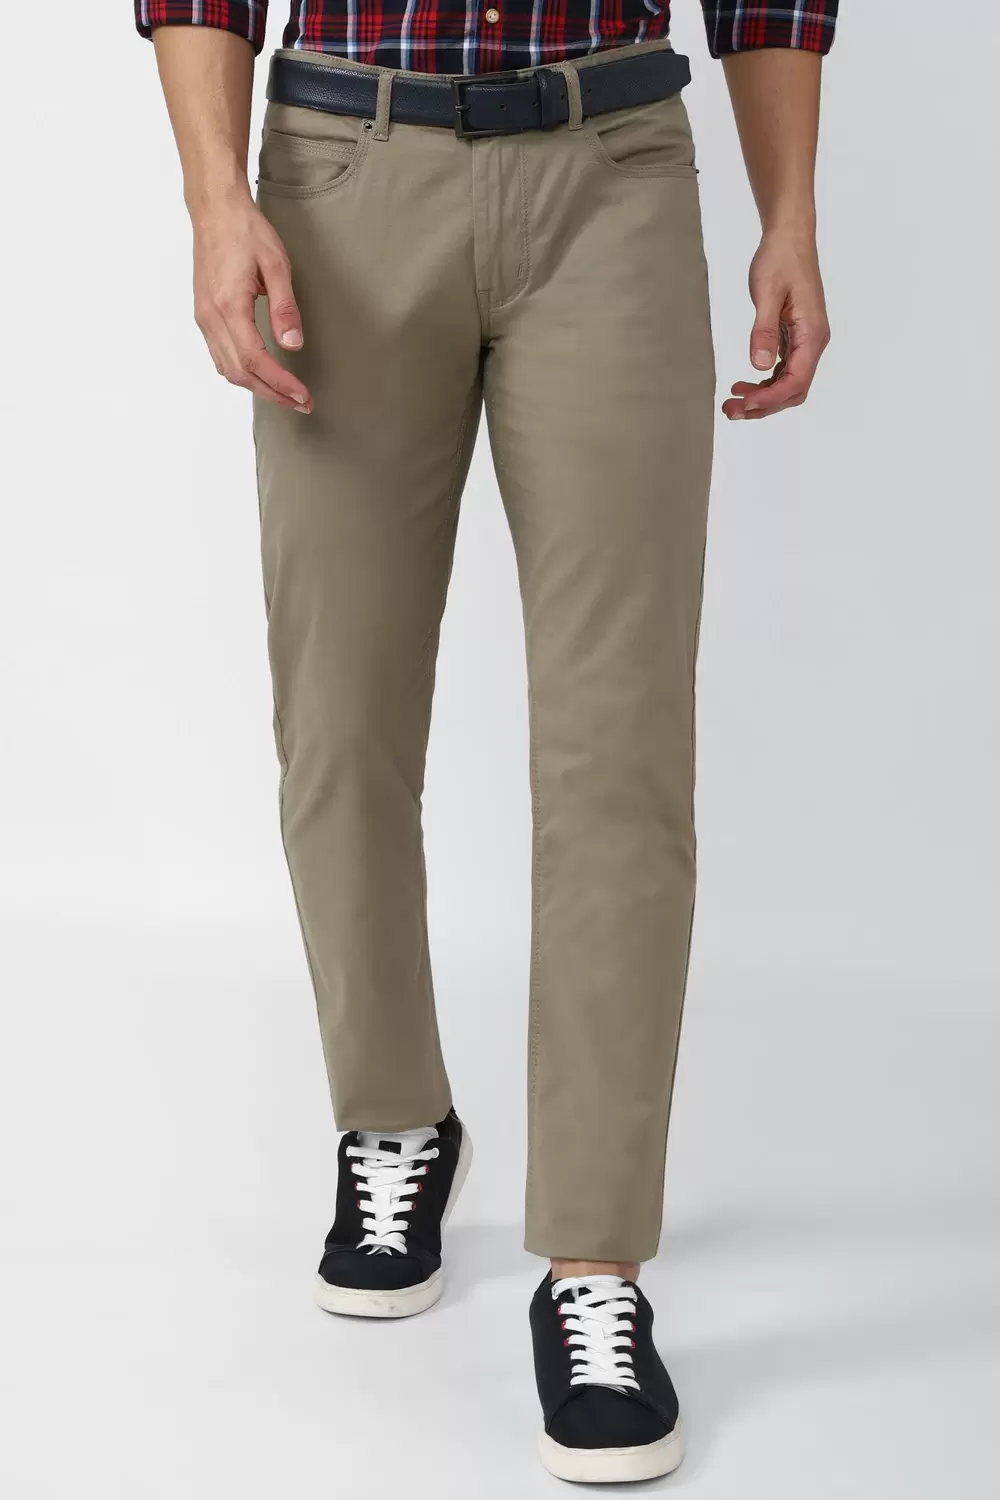 Peter England  Men Khaki Solid best Slim Fit Casual Trousers